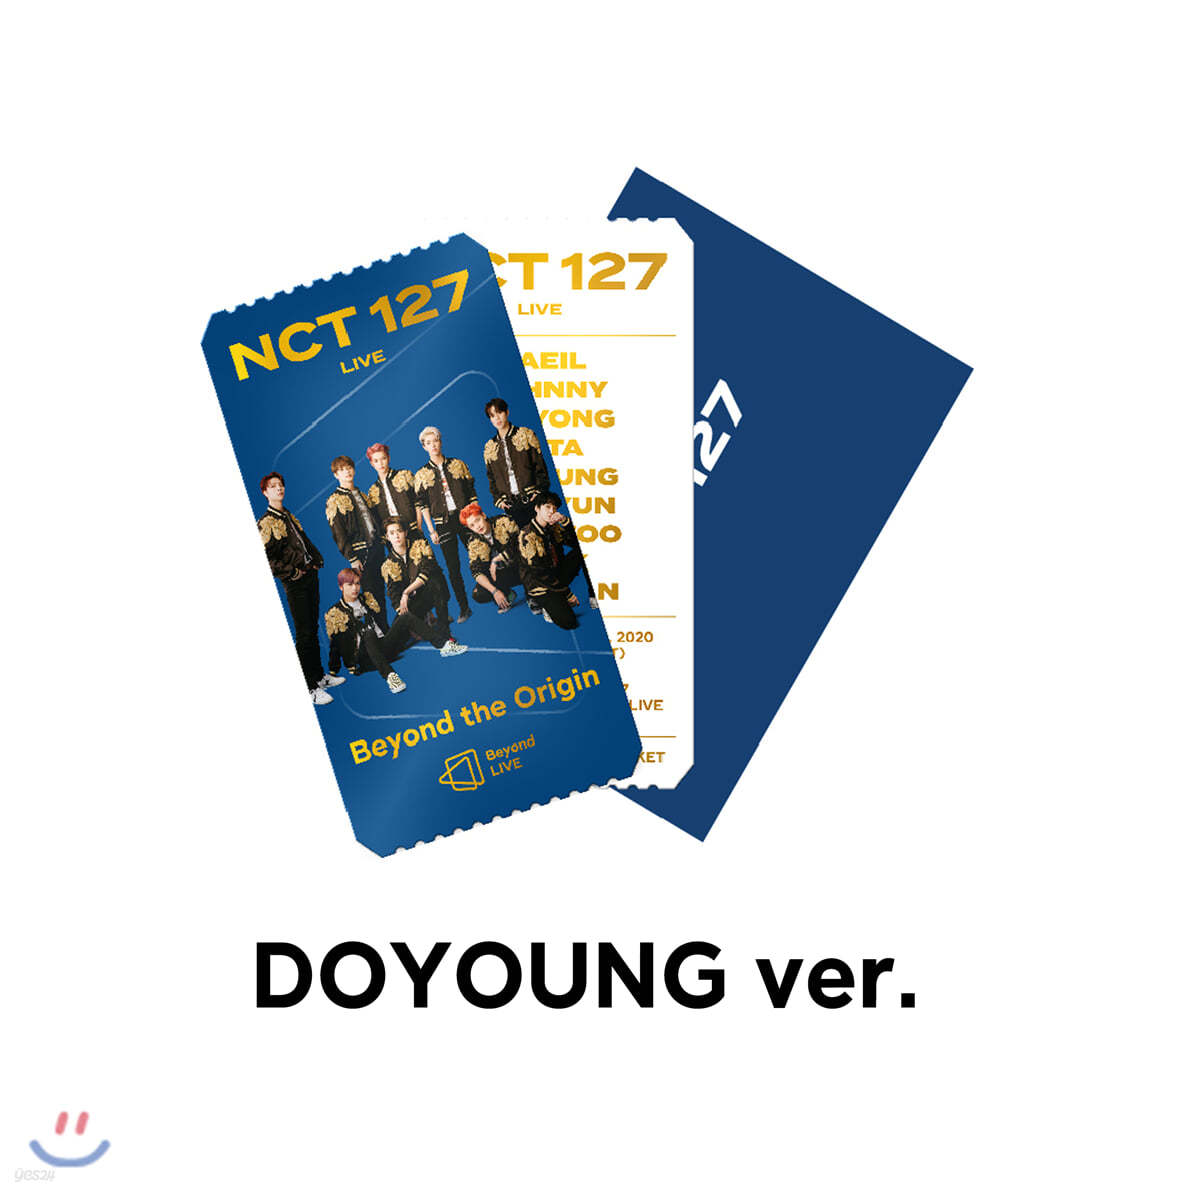 [DOYOUNG] NCT 127 Beyond LIVE Beyond the Origin SPECIAL AR TICKET SET